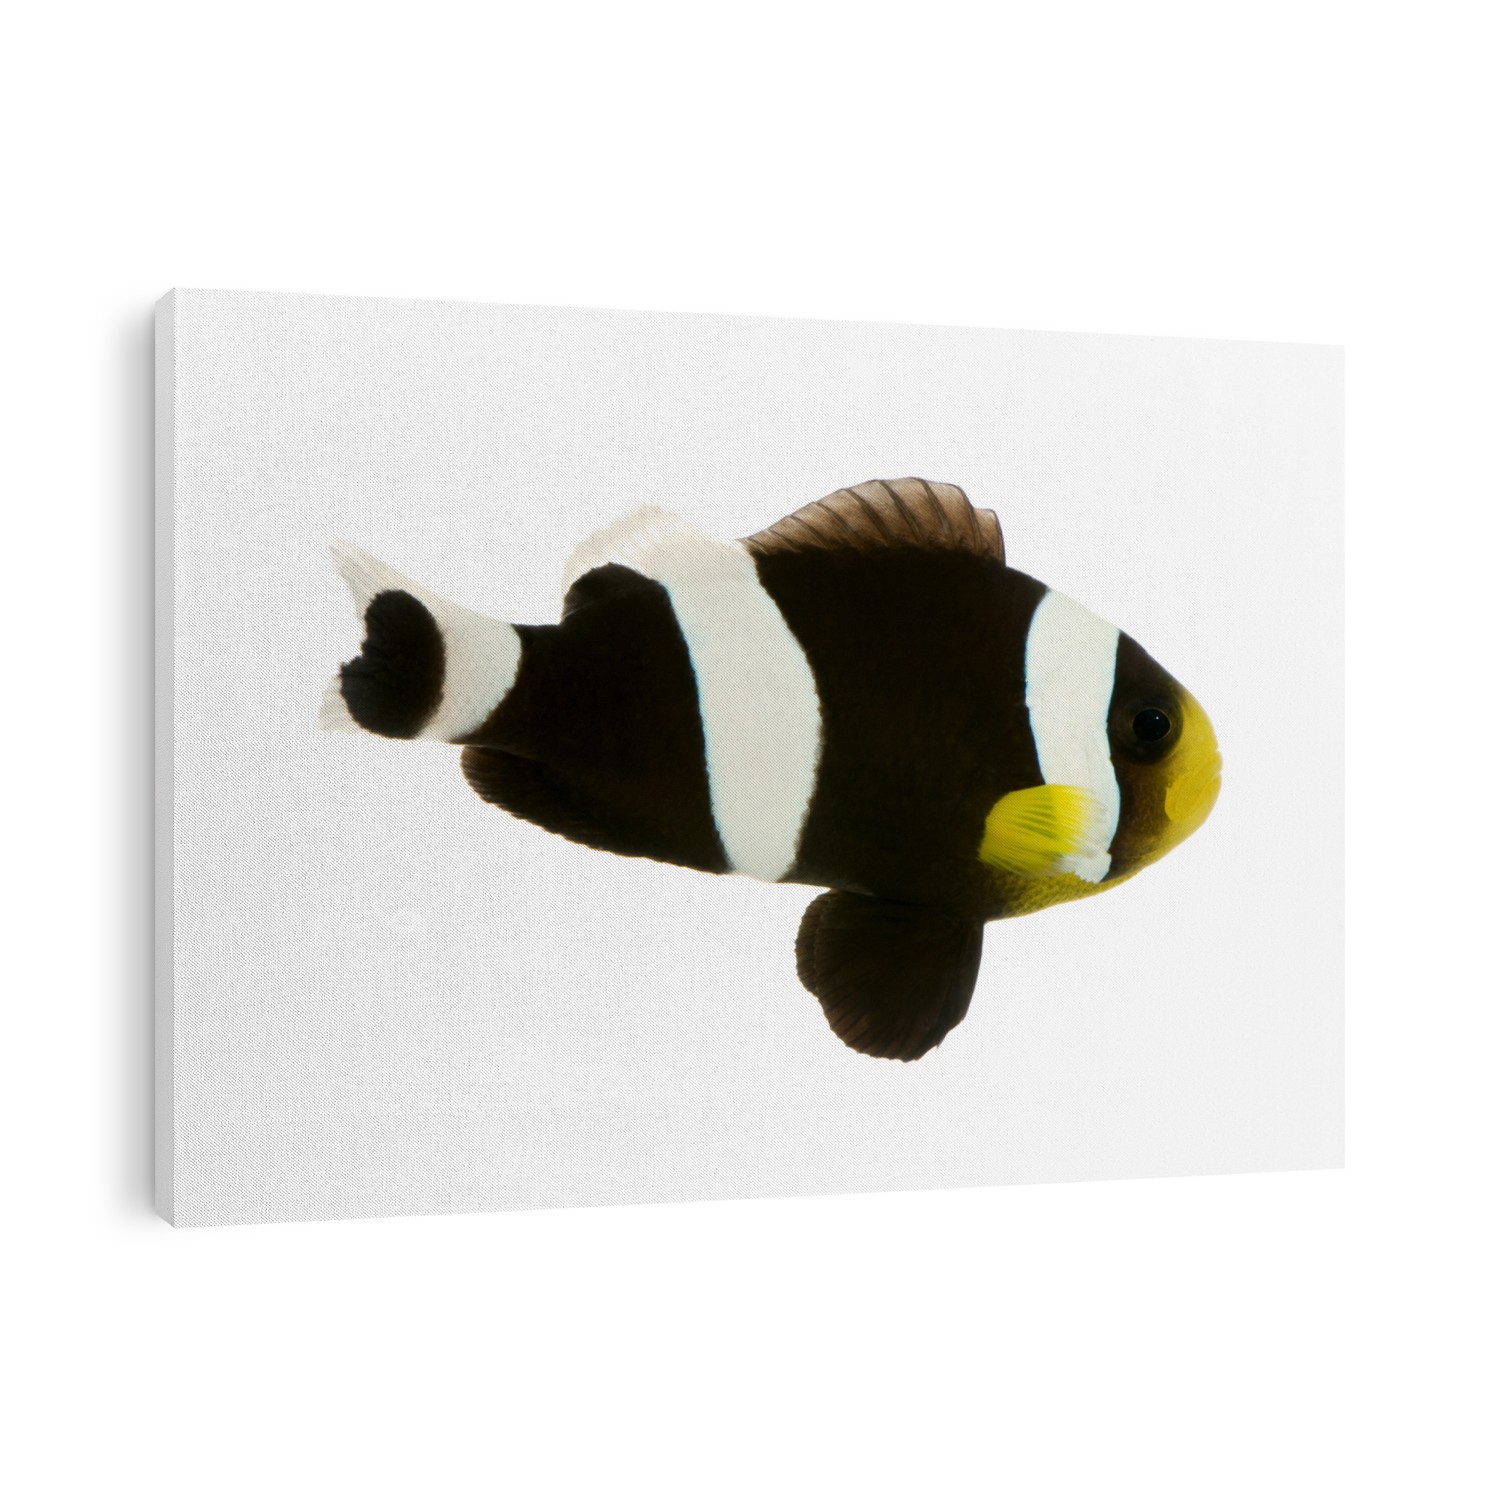 Saddleback Clownfish  - Amphiprion polymnus in front of a white background